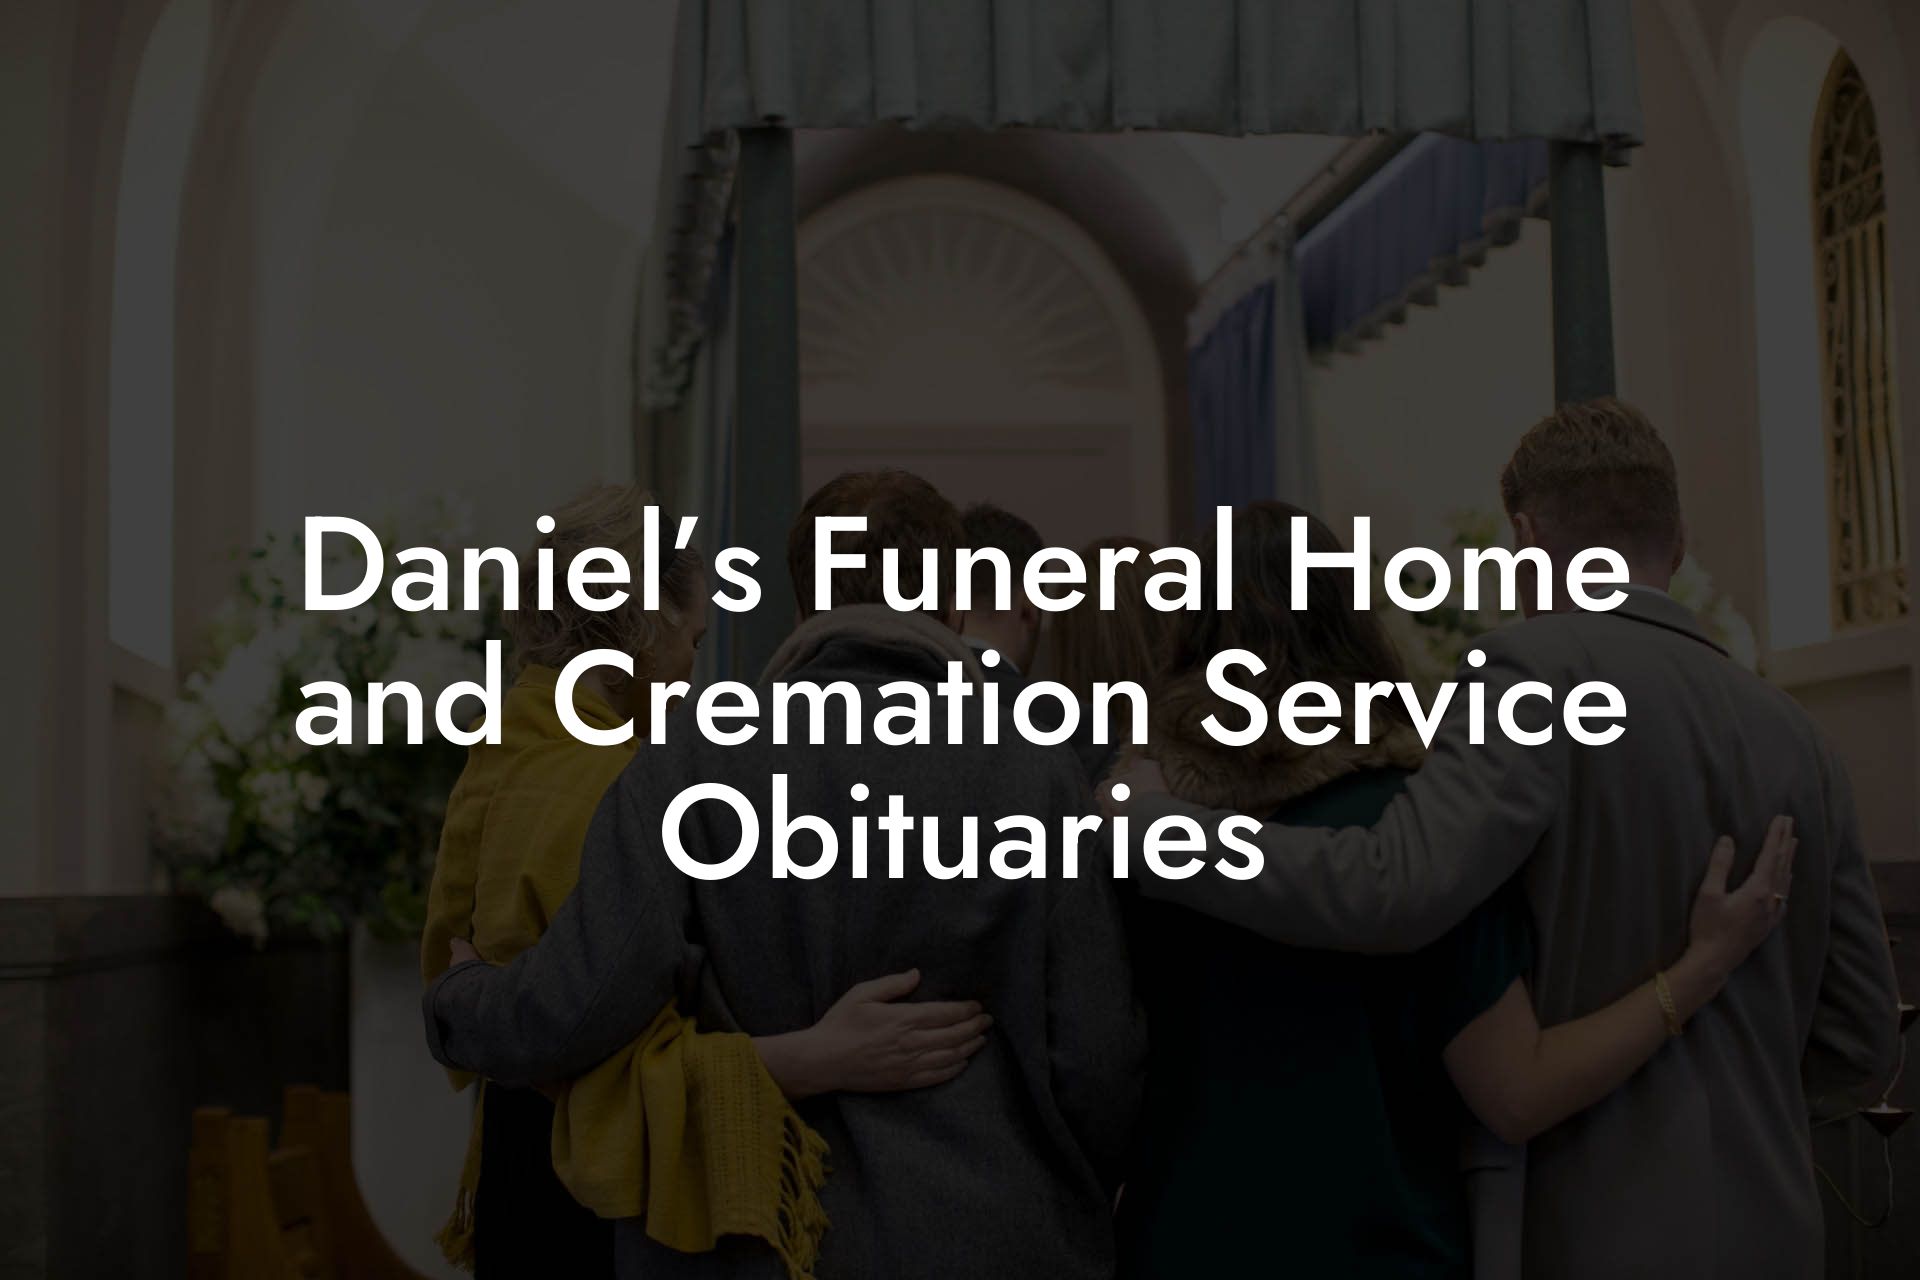 Daniel’s Funeral Home and Cremation Service Obituaries